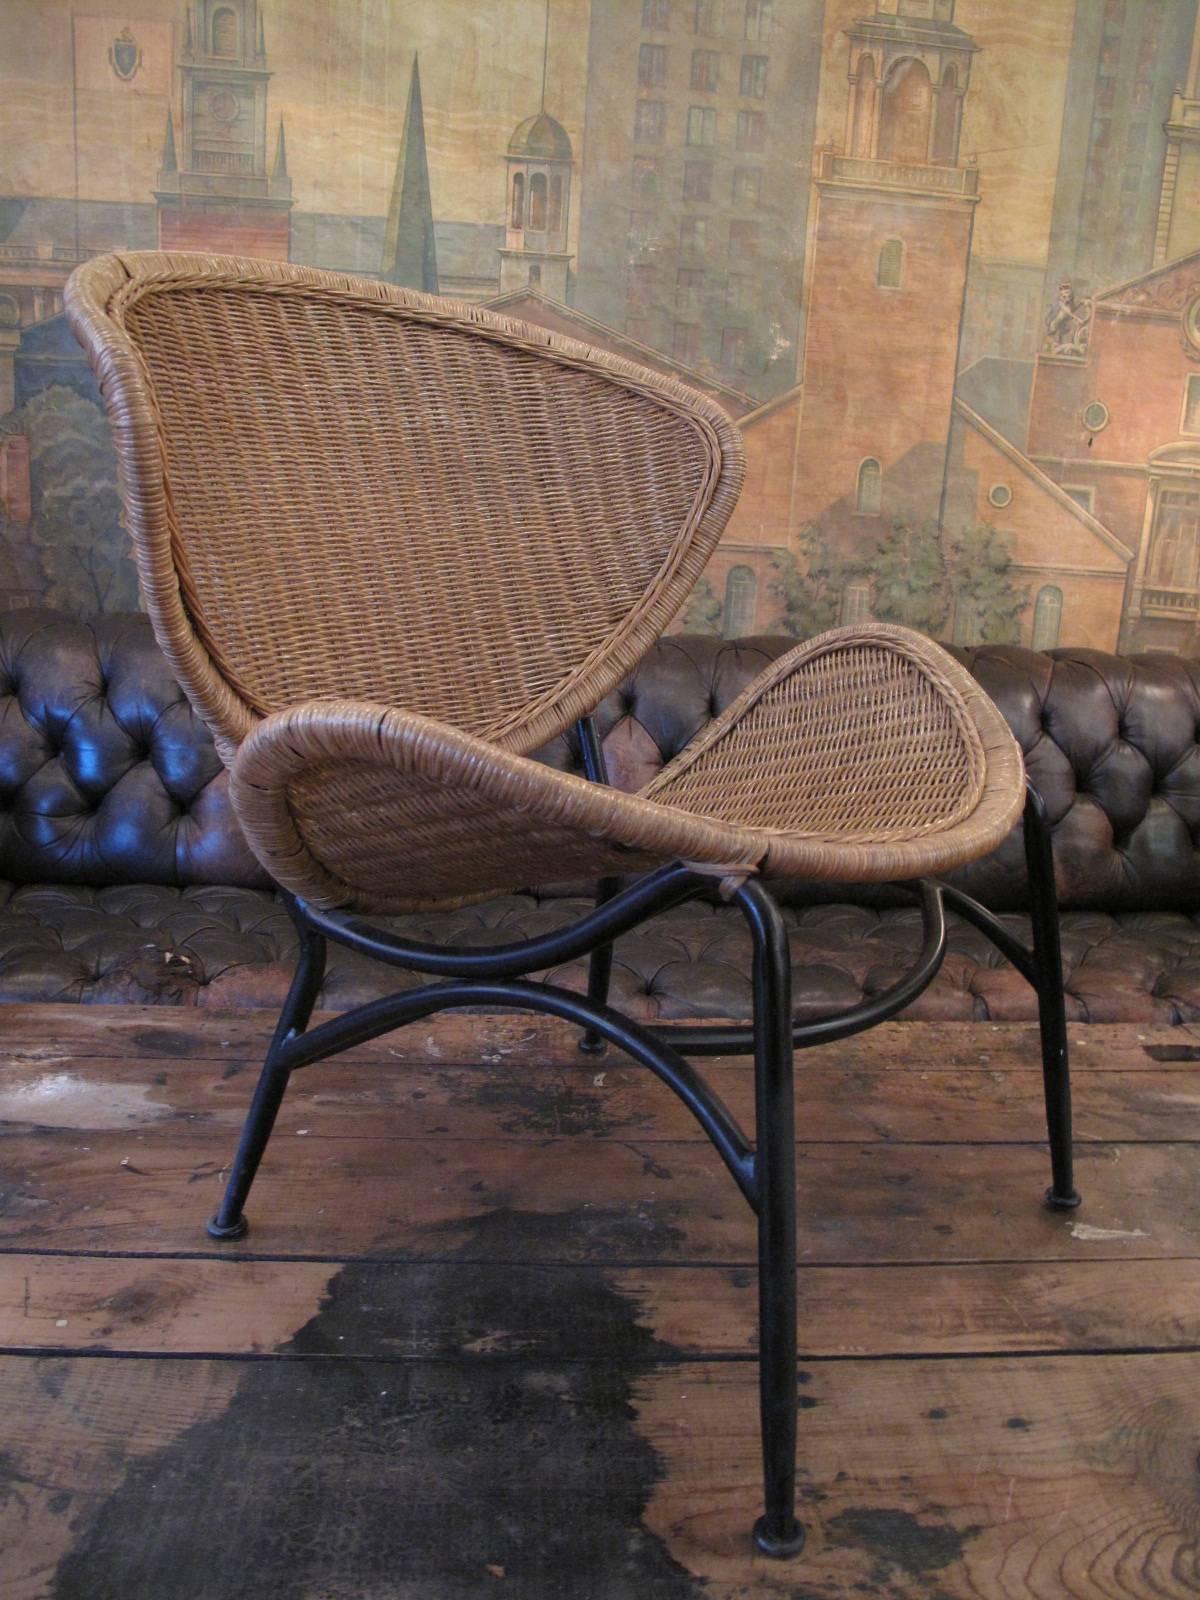 Wicker back and seat, with tubular steel frame.